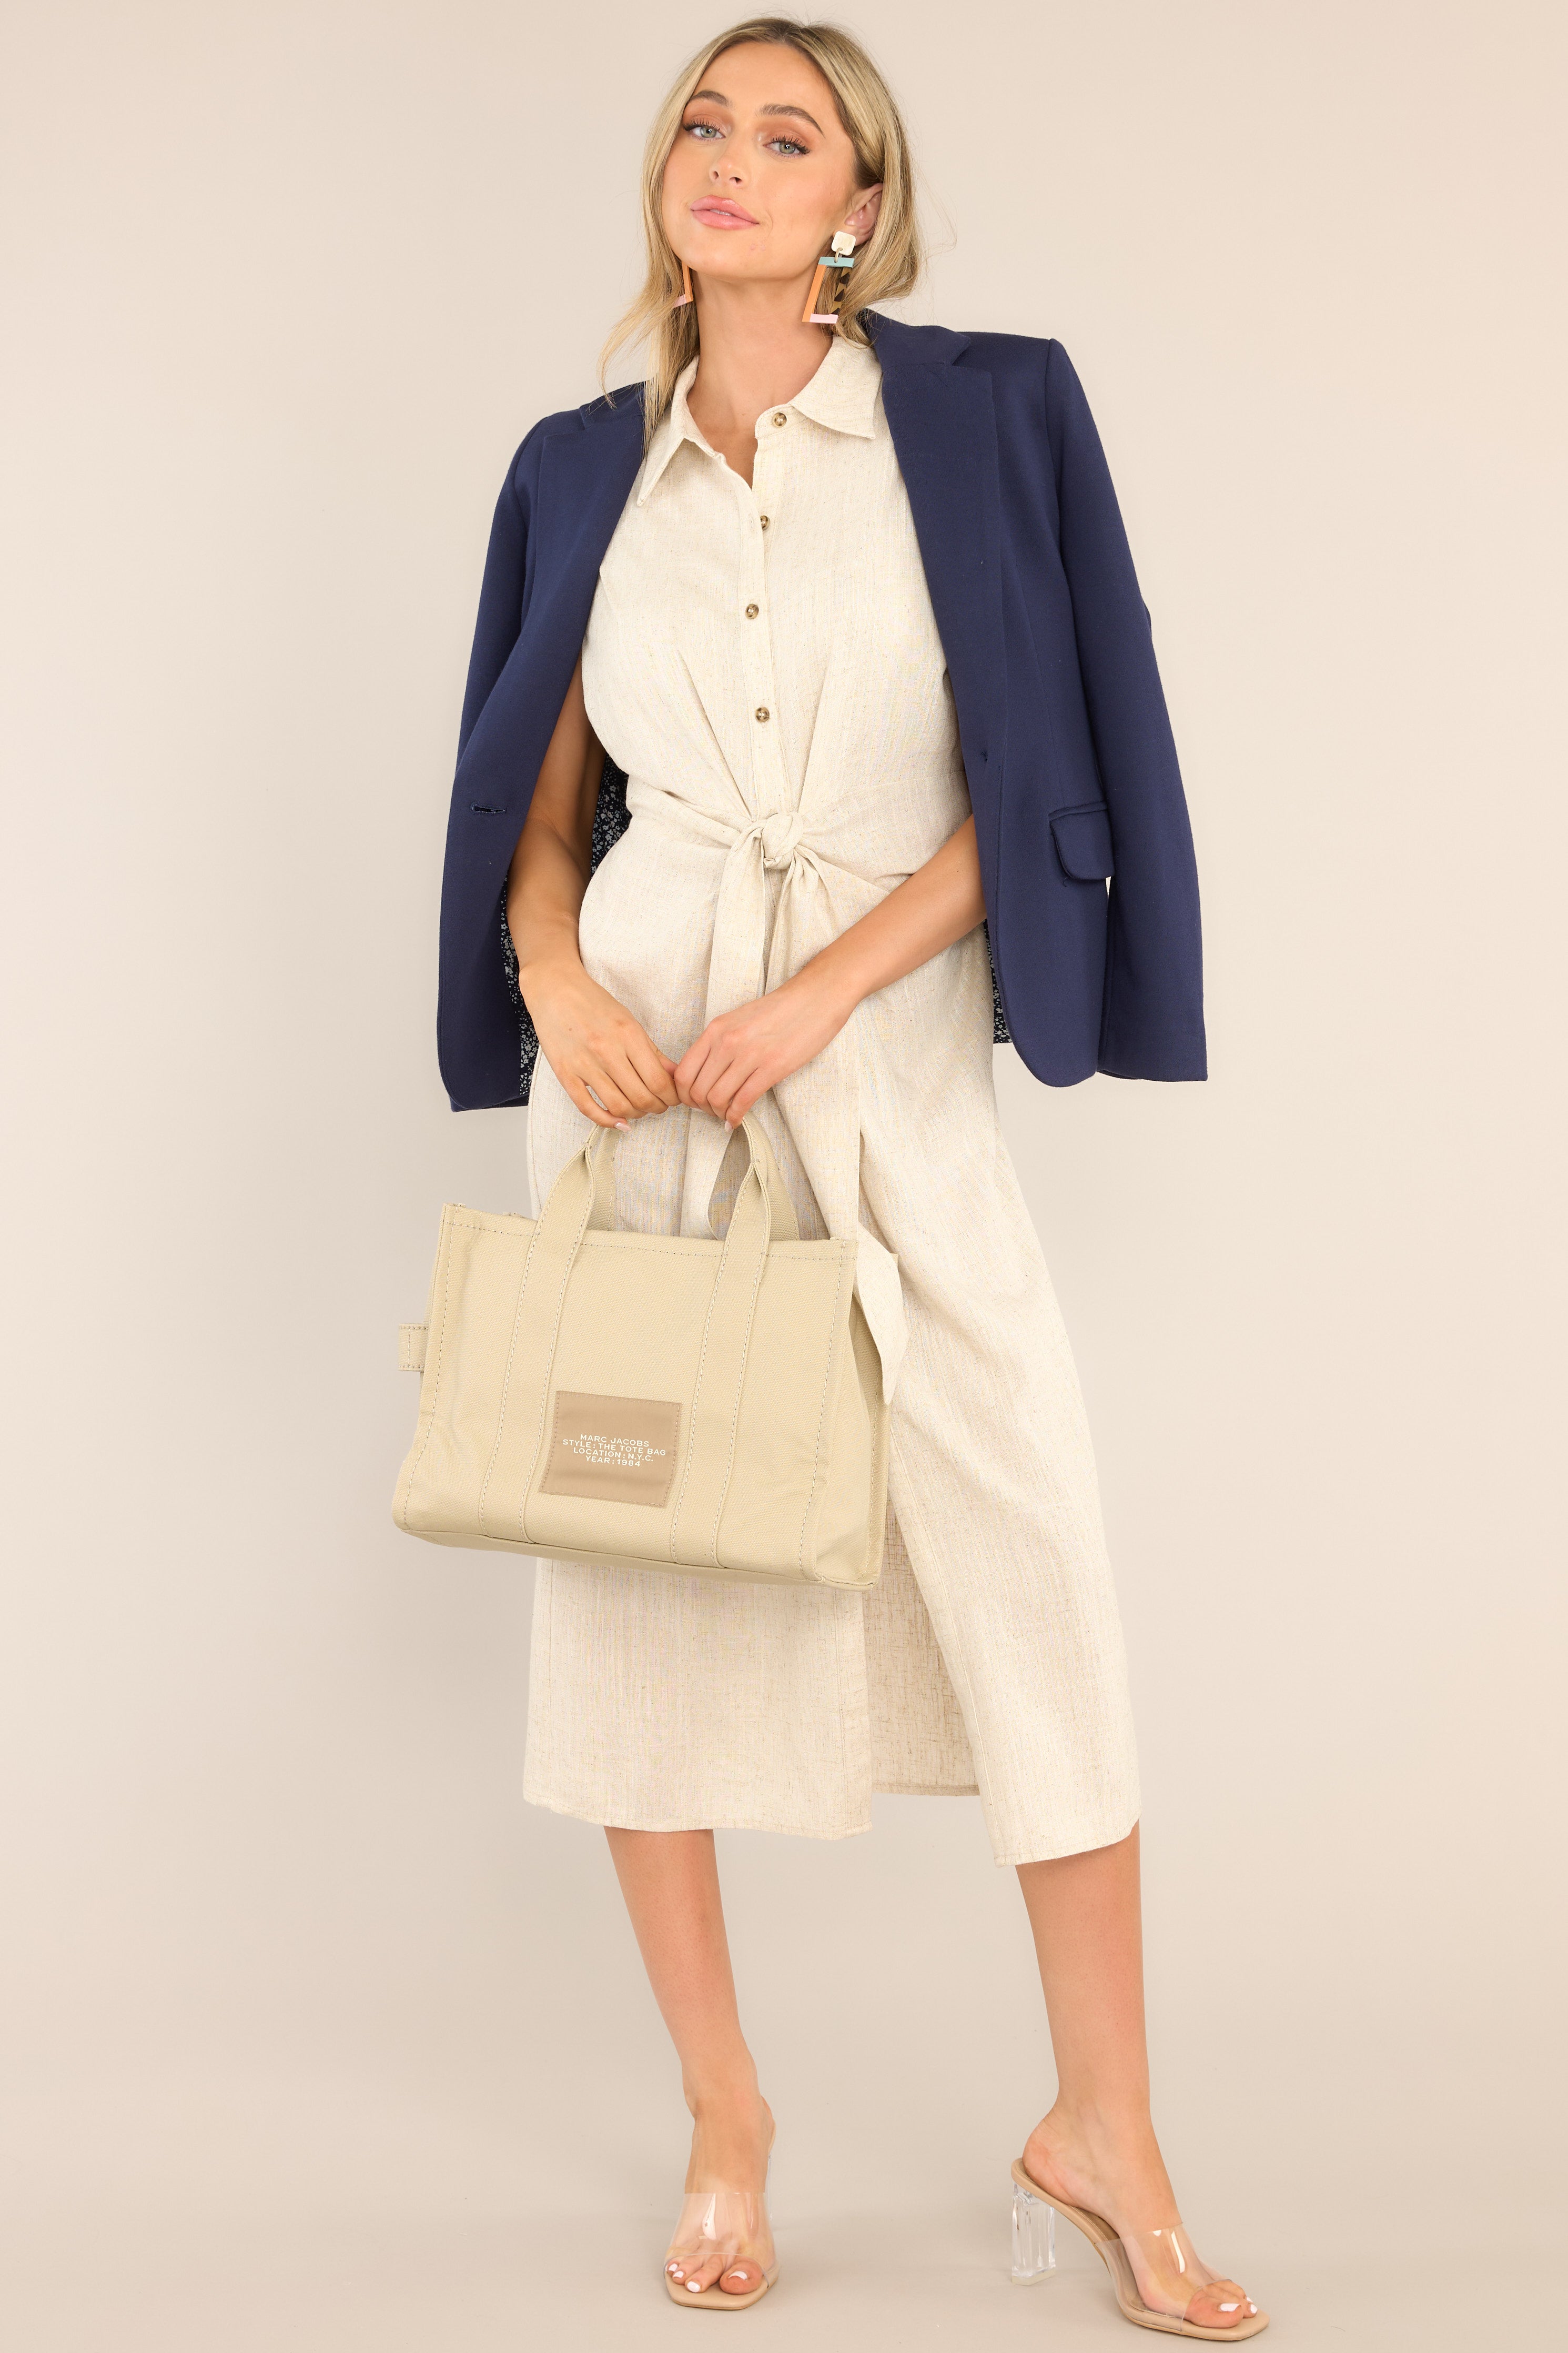 Navy Blazer, styled draped over the shoulders of a sleeveless tie dress. 